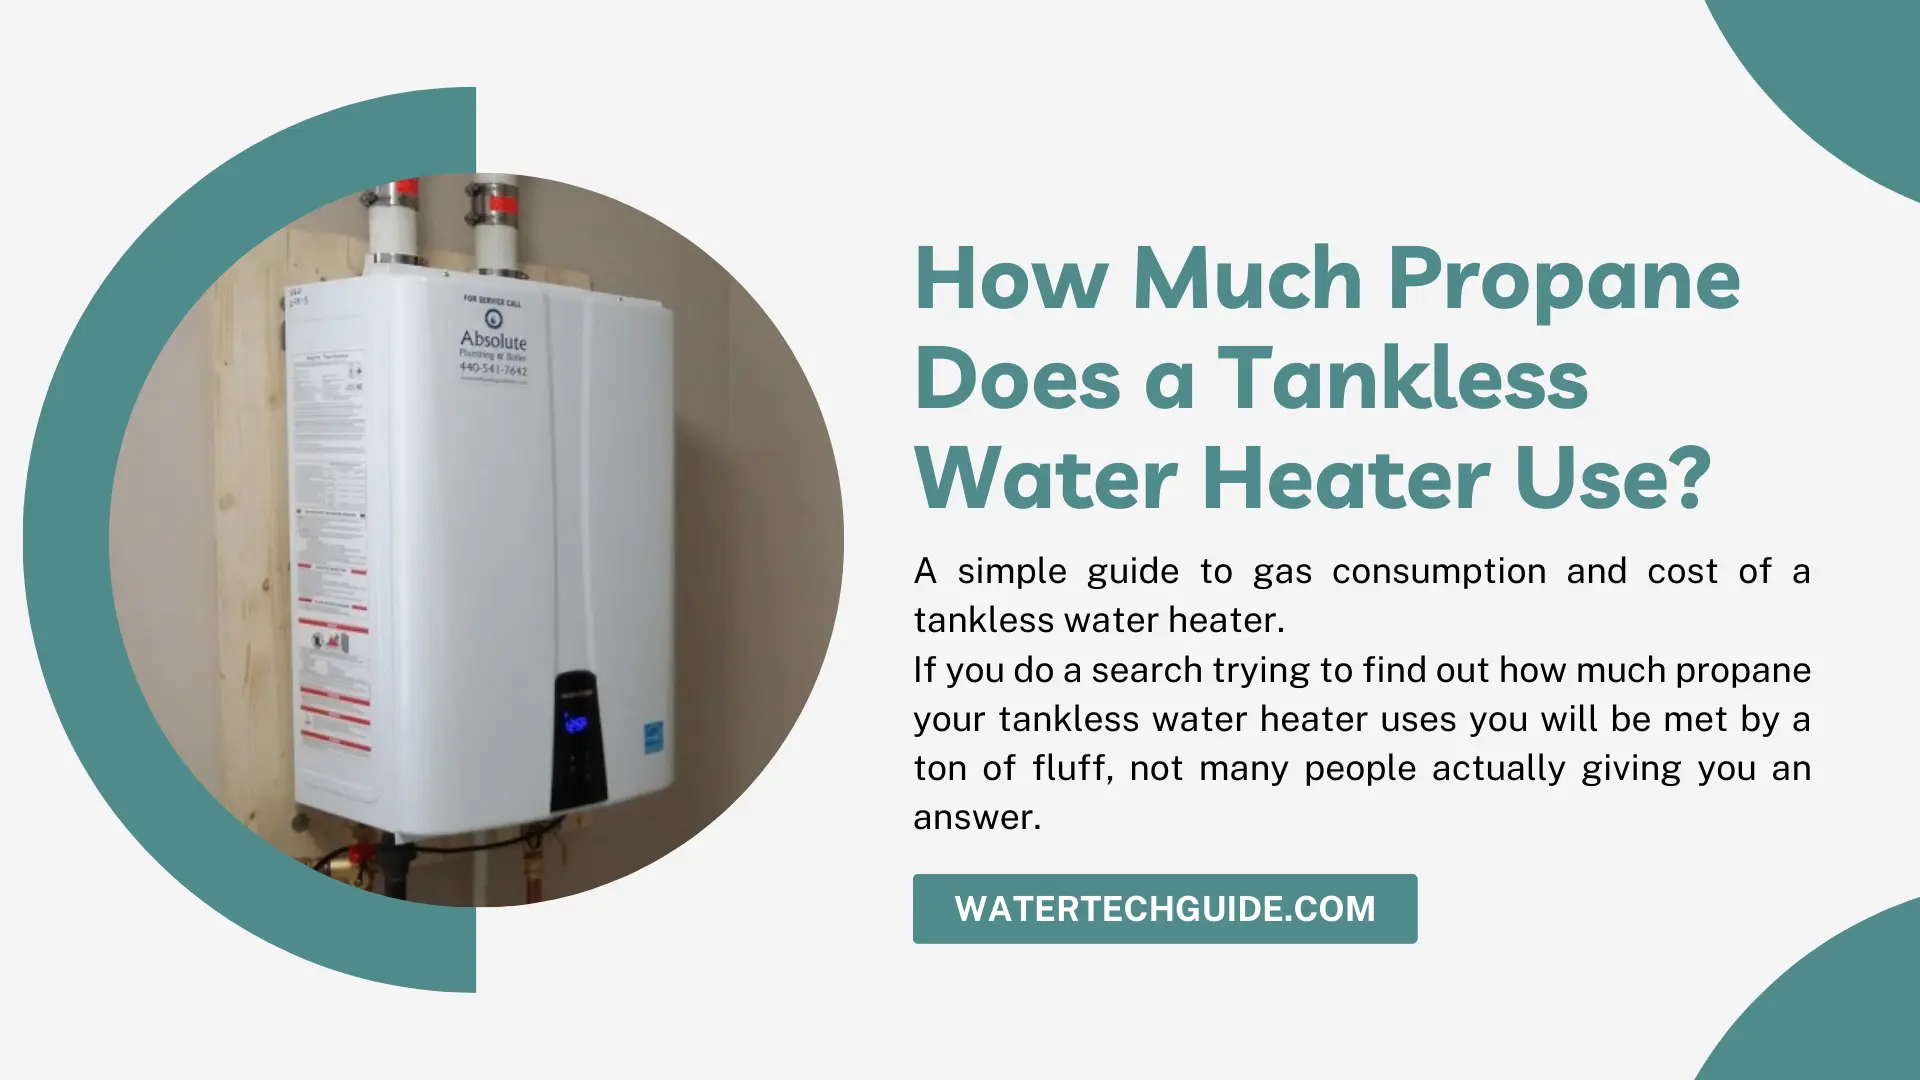 How Much Propane Does a Tankless Water Heater Use